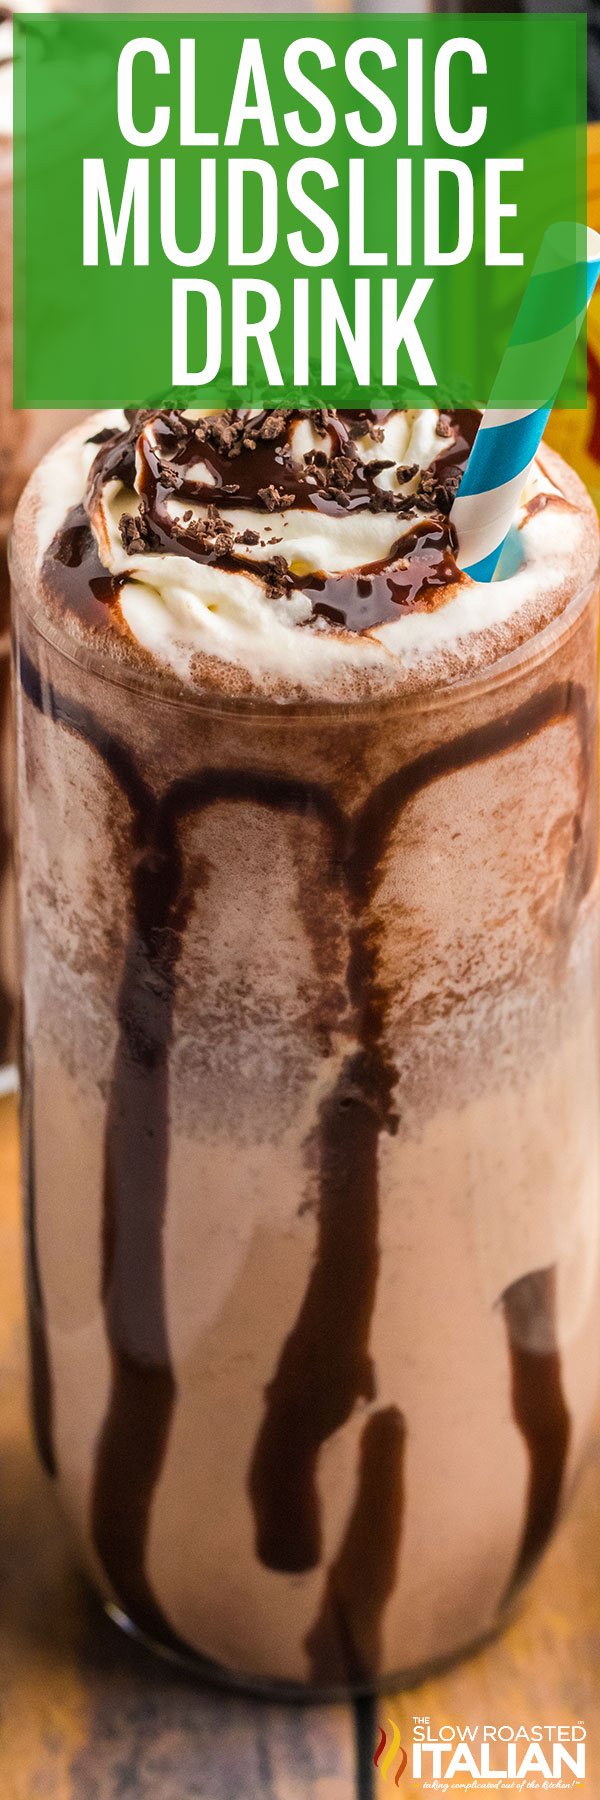 titled image (and shown): frozen mudslide